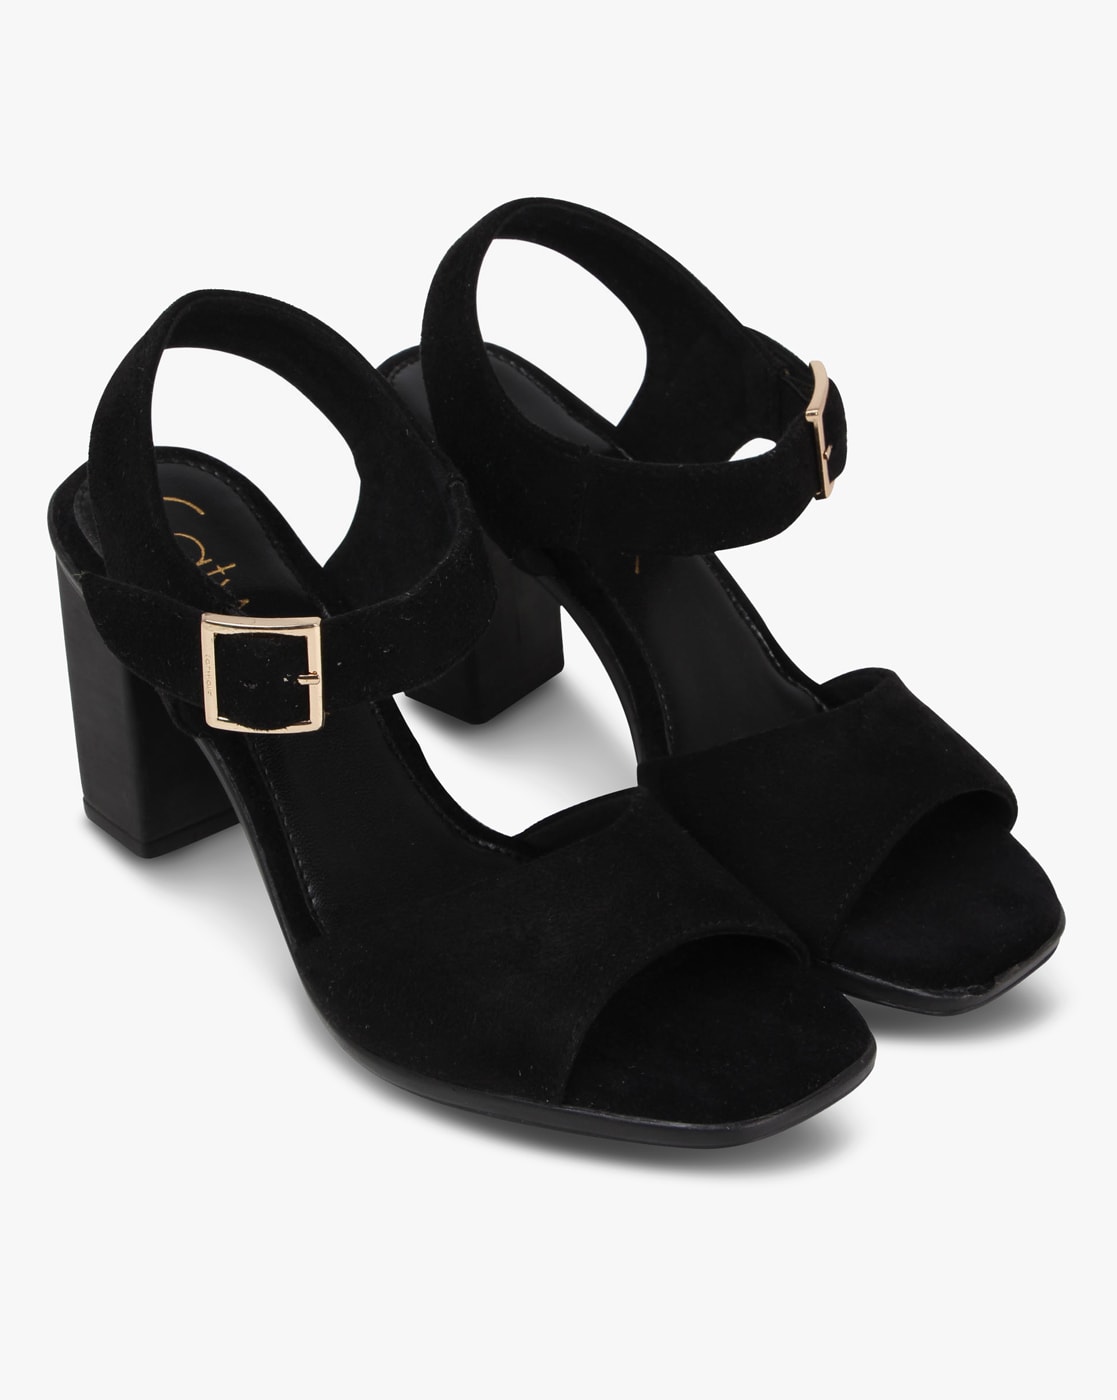 Buy Black Heeled Shoes for Women by CATWALK Online | Ajio.com